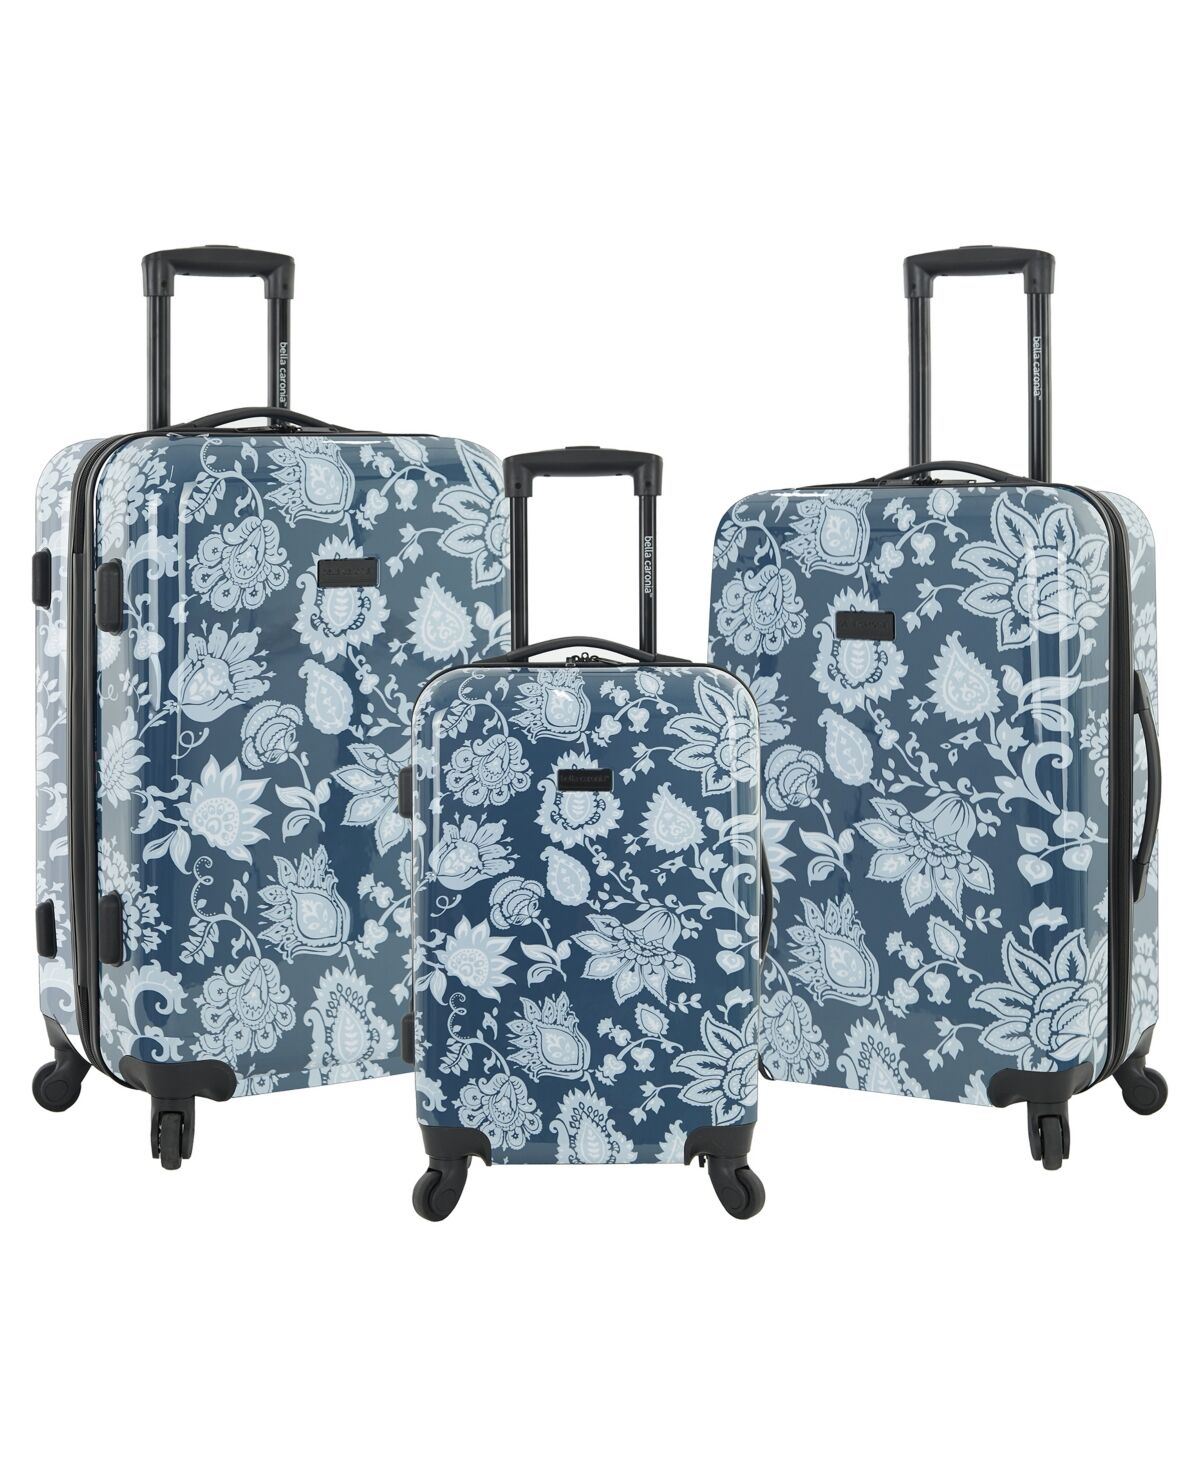 Bella Caronia 3 Piece Rolling Hardside Luggage Set with 4 Wheel Spinners - Royal